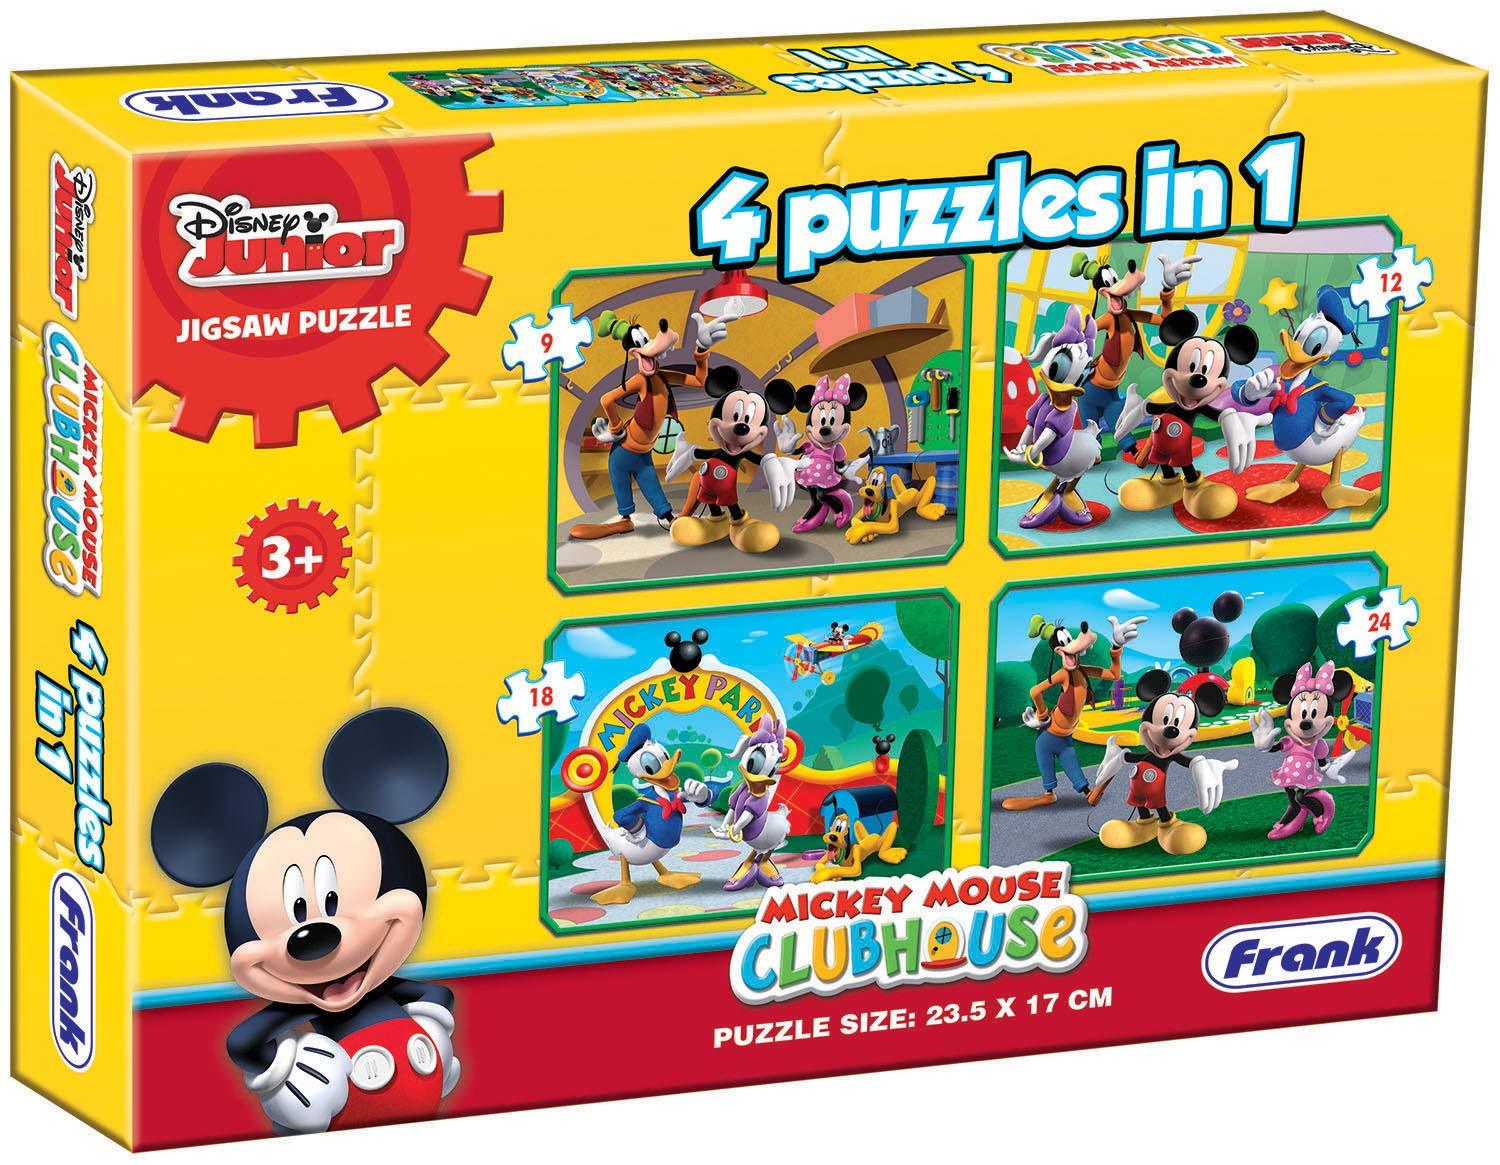 Frank Disney Mickey Mouse Clubhouse 4 in 1 Jigsaw Puzzles